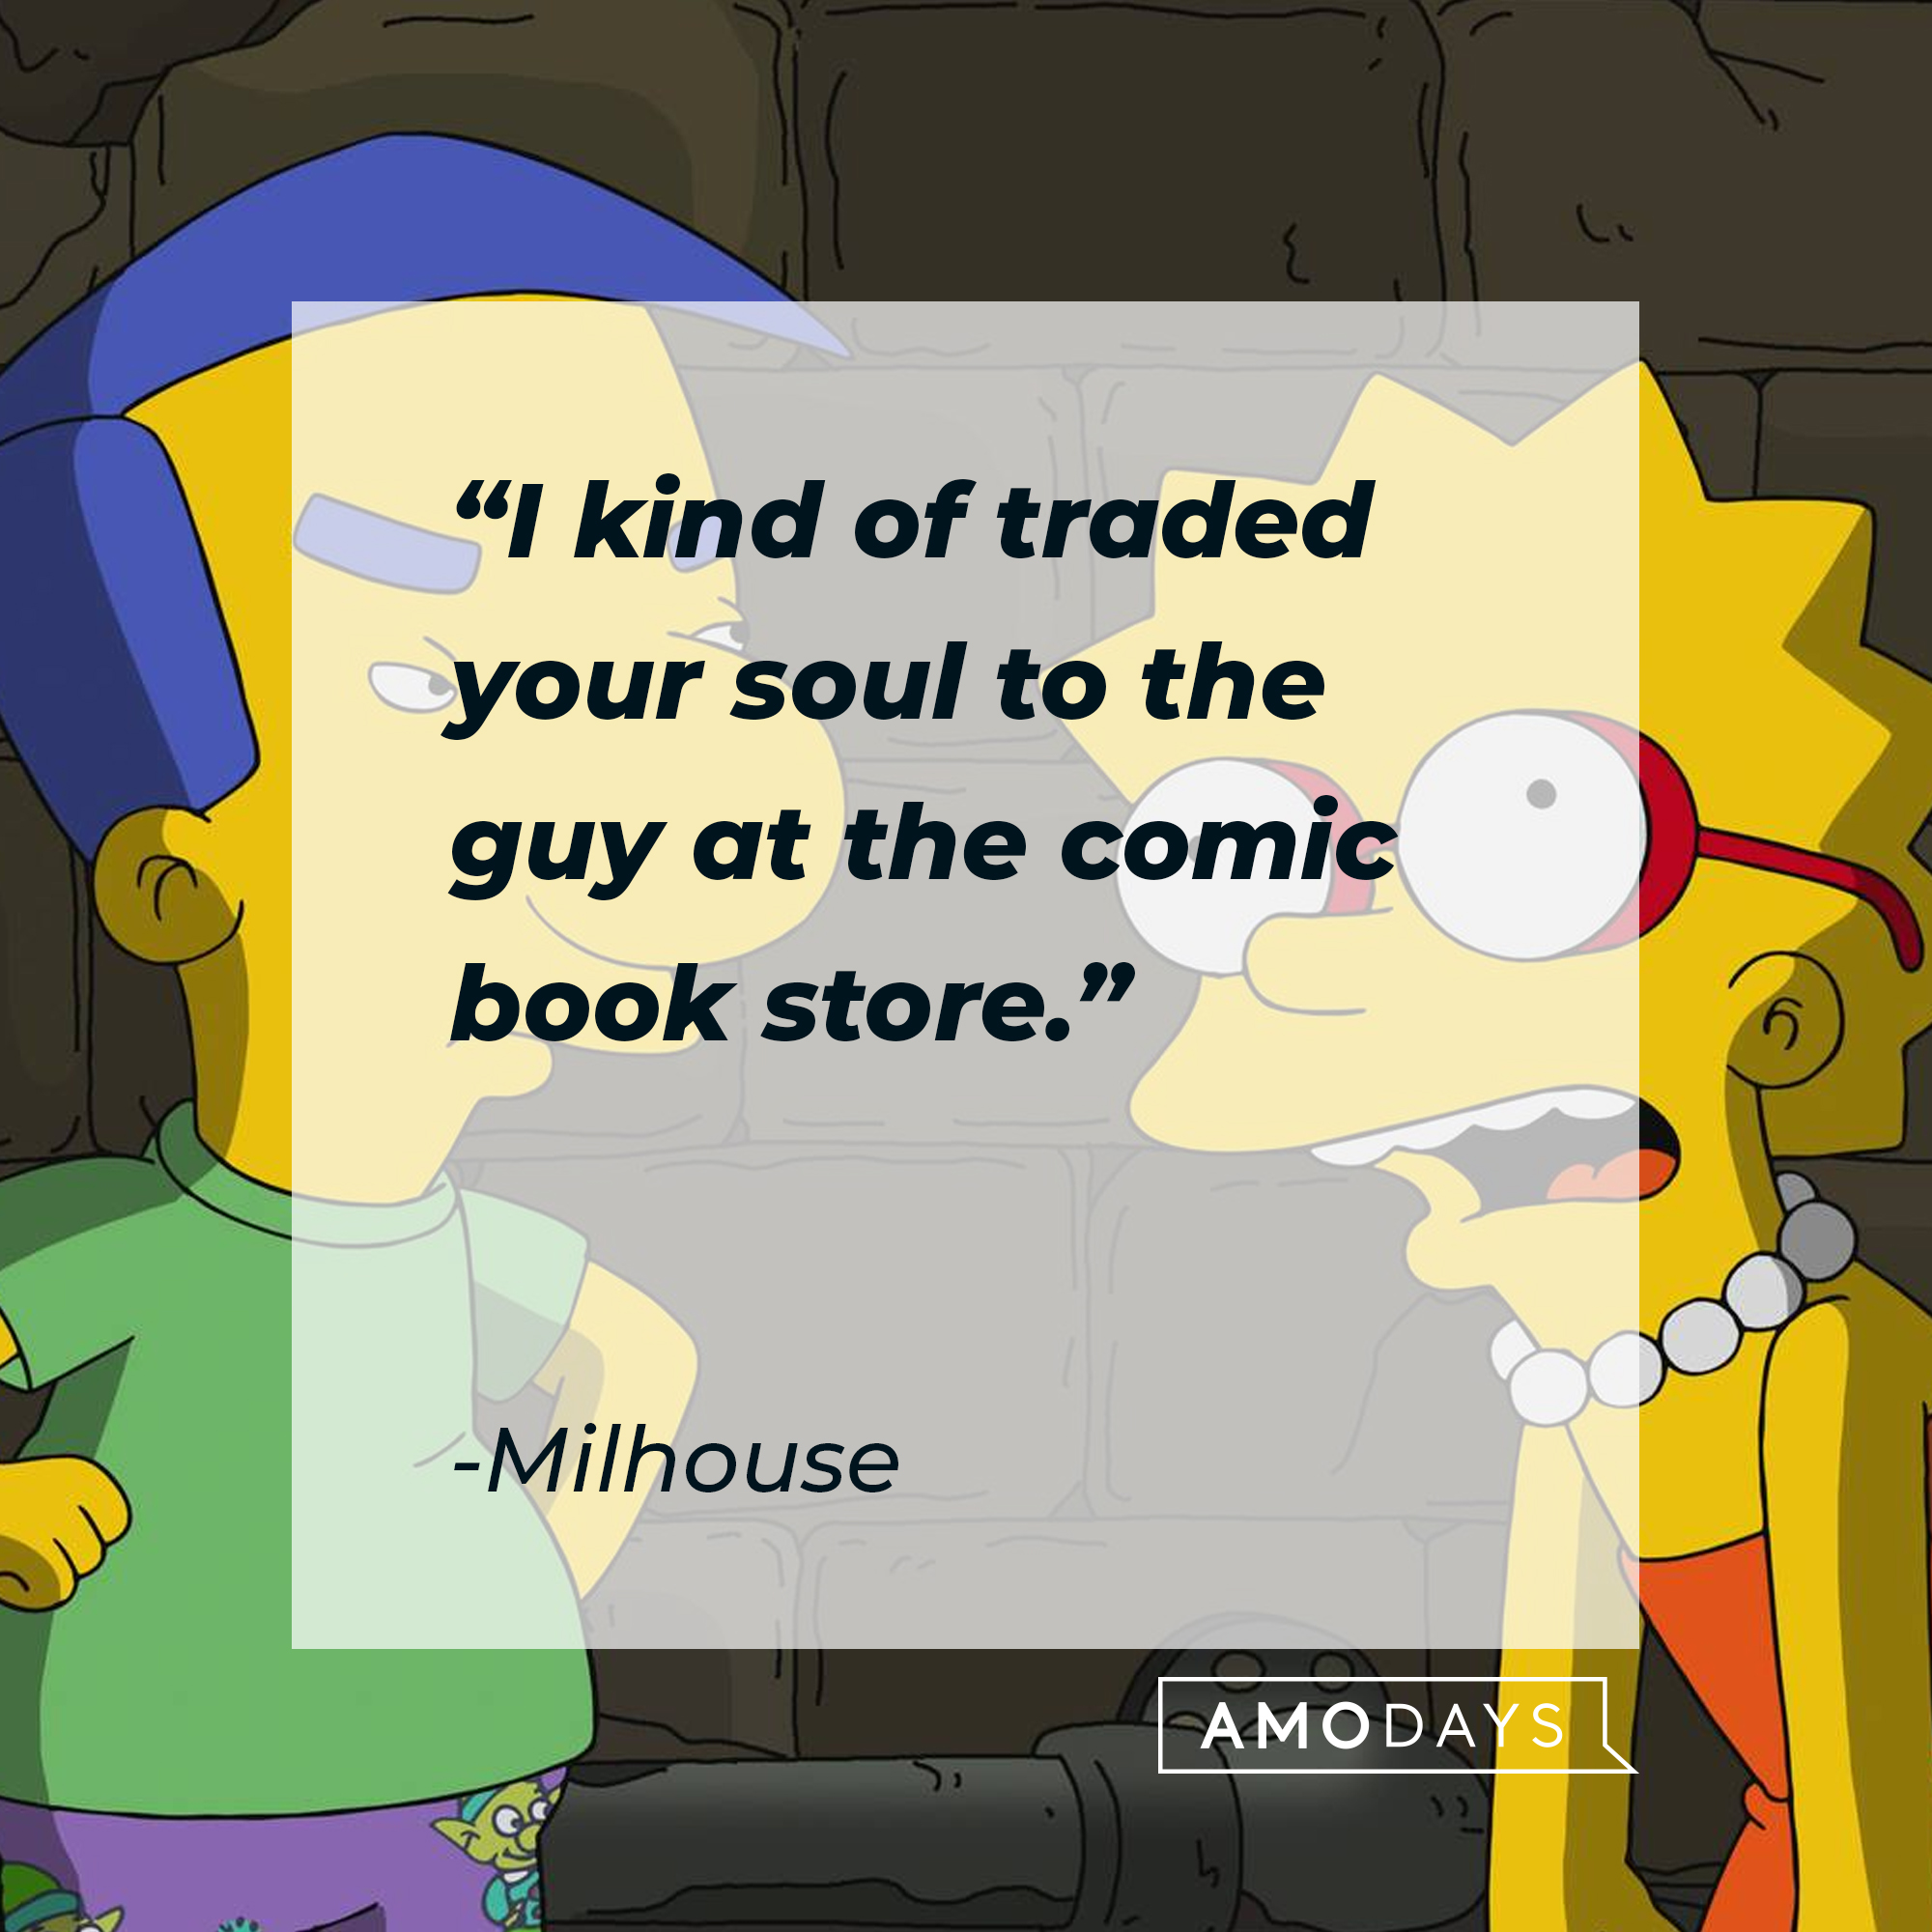 Bart Simpson and Milhouse, with Milhouse's quote: “I kind of traded your soul to the guy at the comic book store.” | Source: facebook.com/TheSimpsons